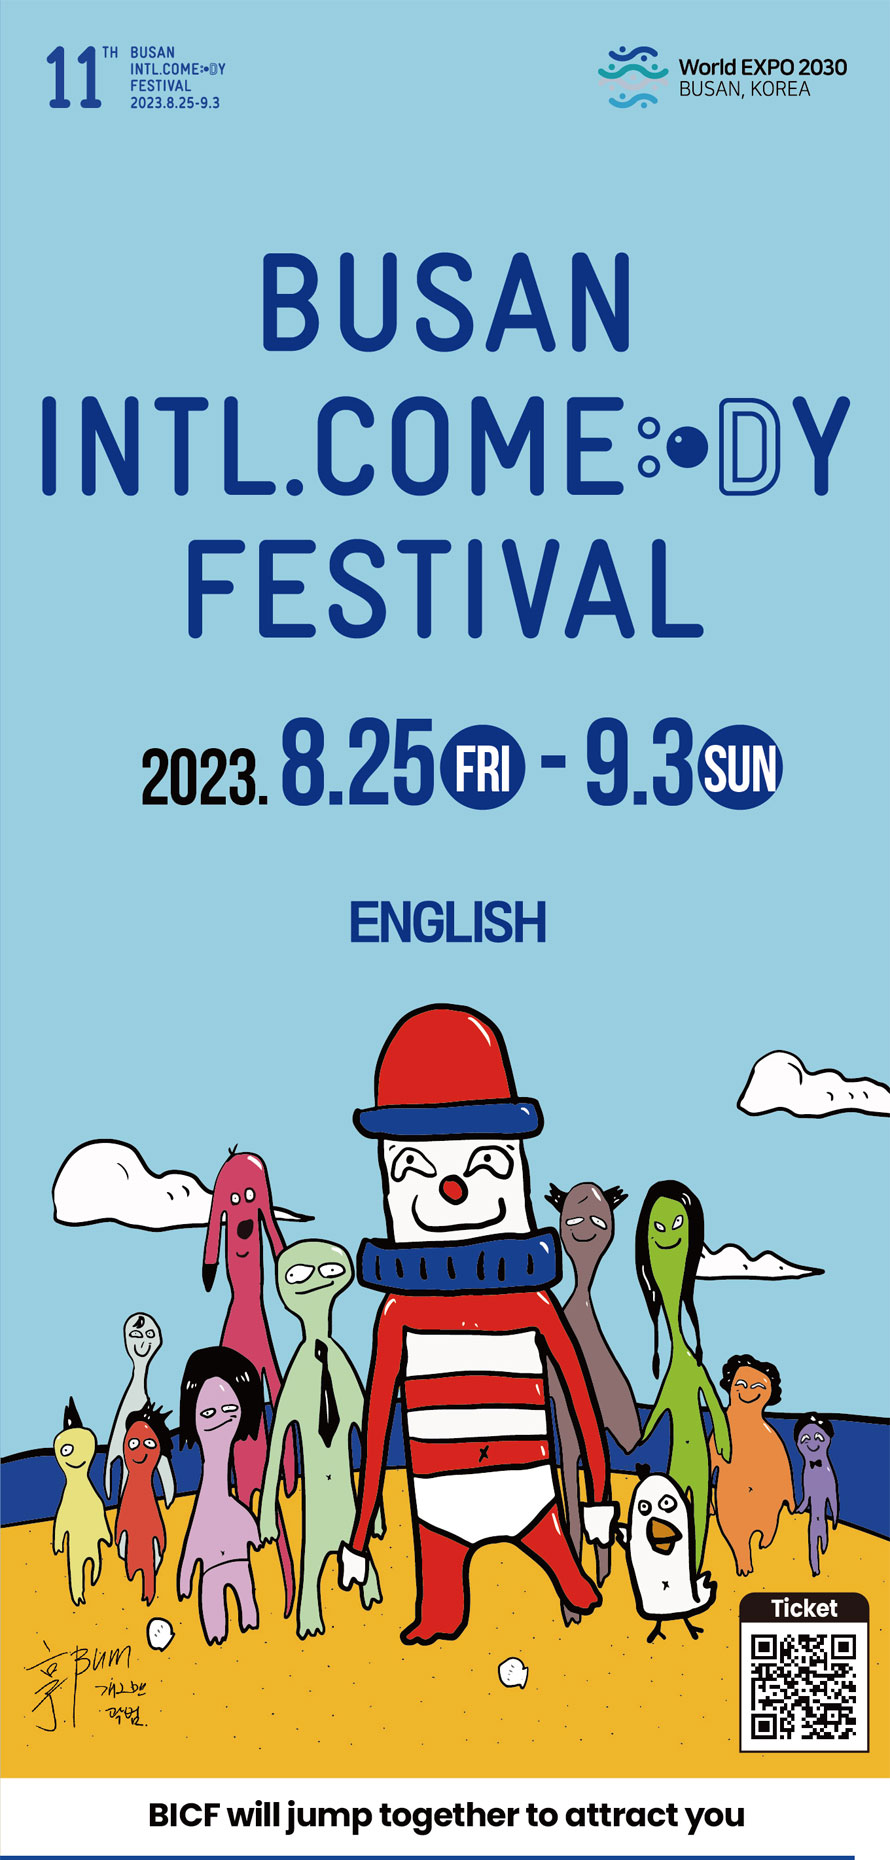 11th Busan International Comedy Festival 
Busan International Comedy Festival 
2023.8.25 FRI - 9.3 SUN
ENGLISH 
Ticket
BICF will jump togerher to attract you